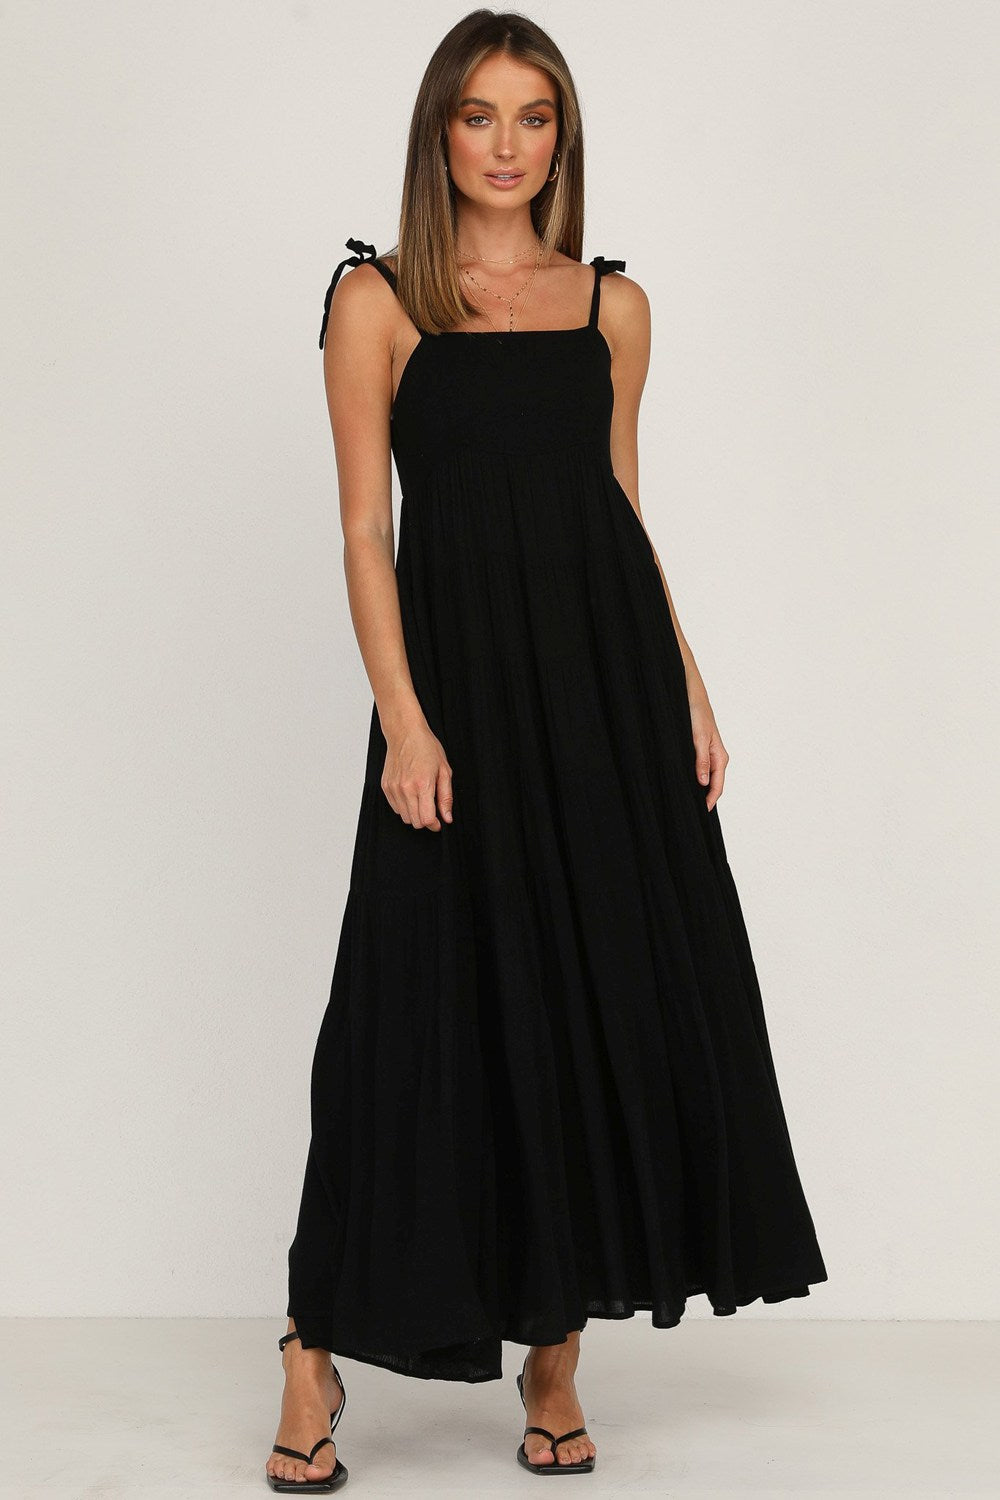 Buy Rayon Solid Dress in Black